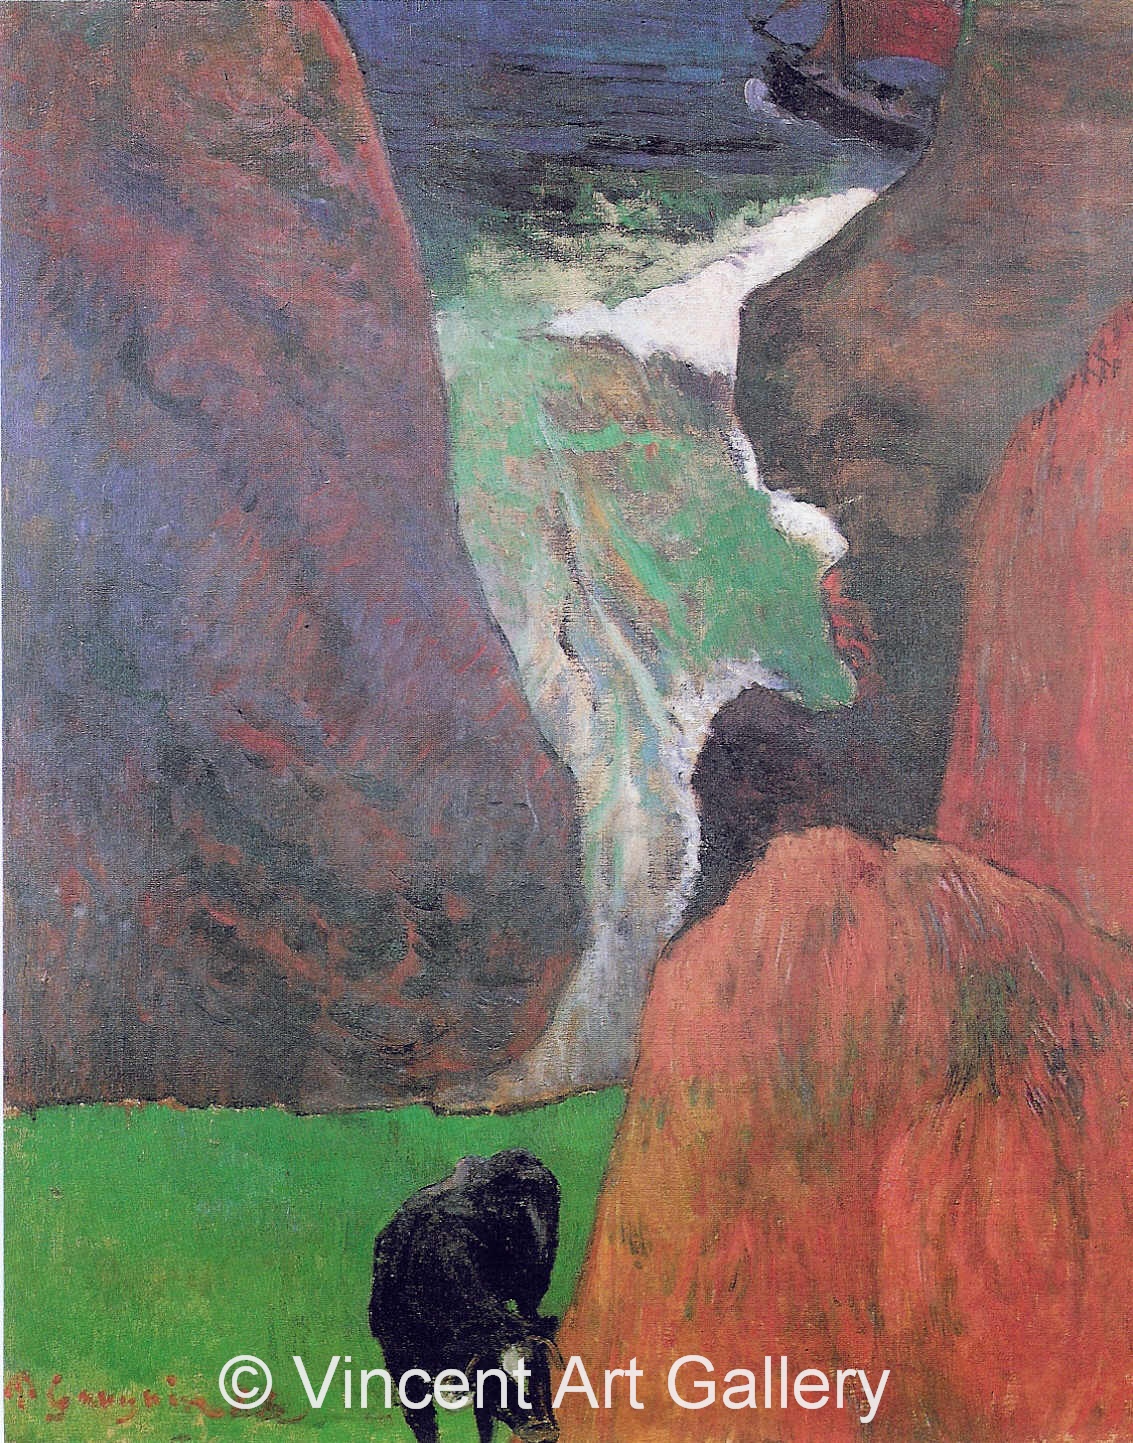 A3606, GAUGUIN, Seascape with a Cow on the Edge of a Cliff,